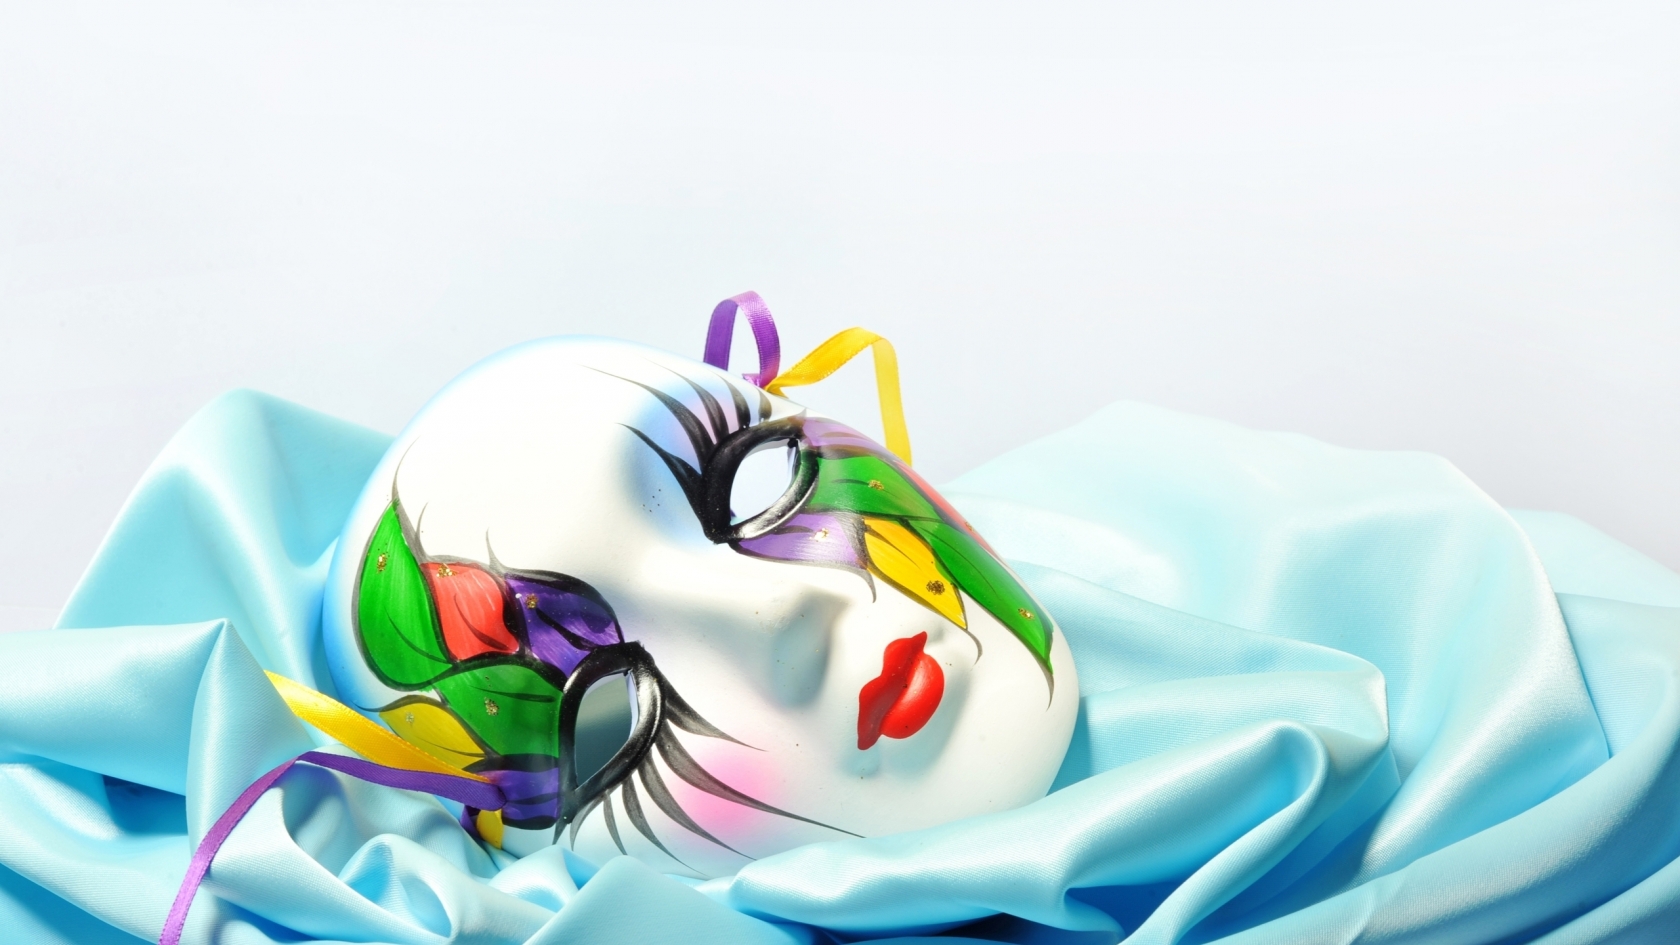 Lady Mask for 1680 x 945 HDTV resolution